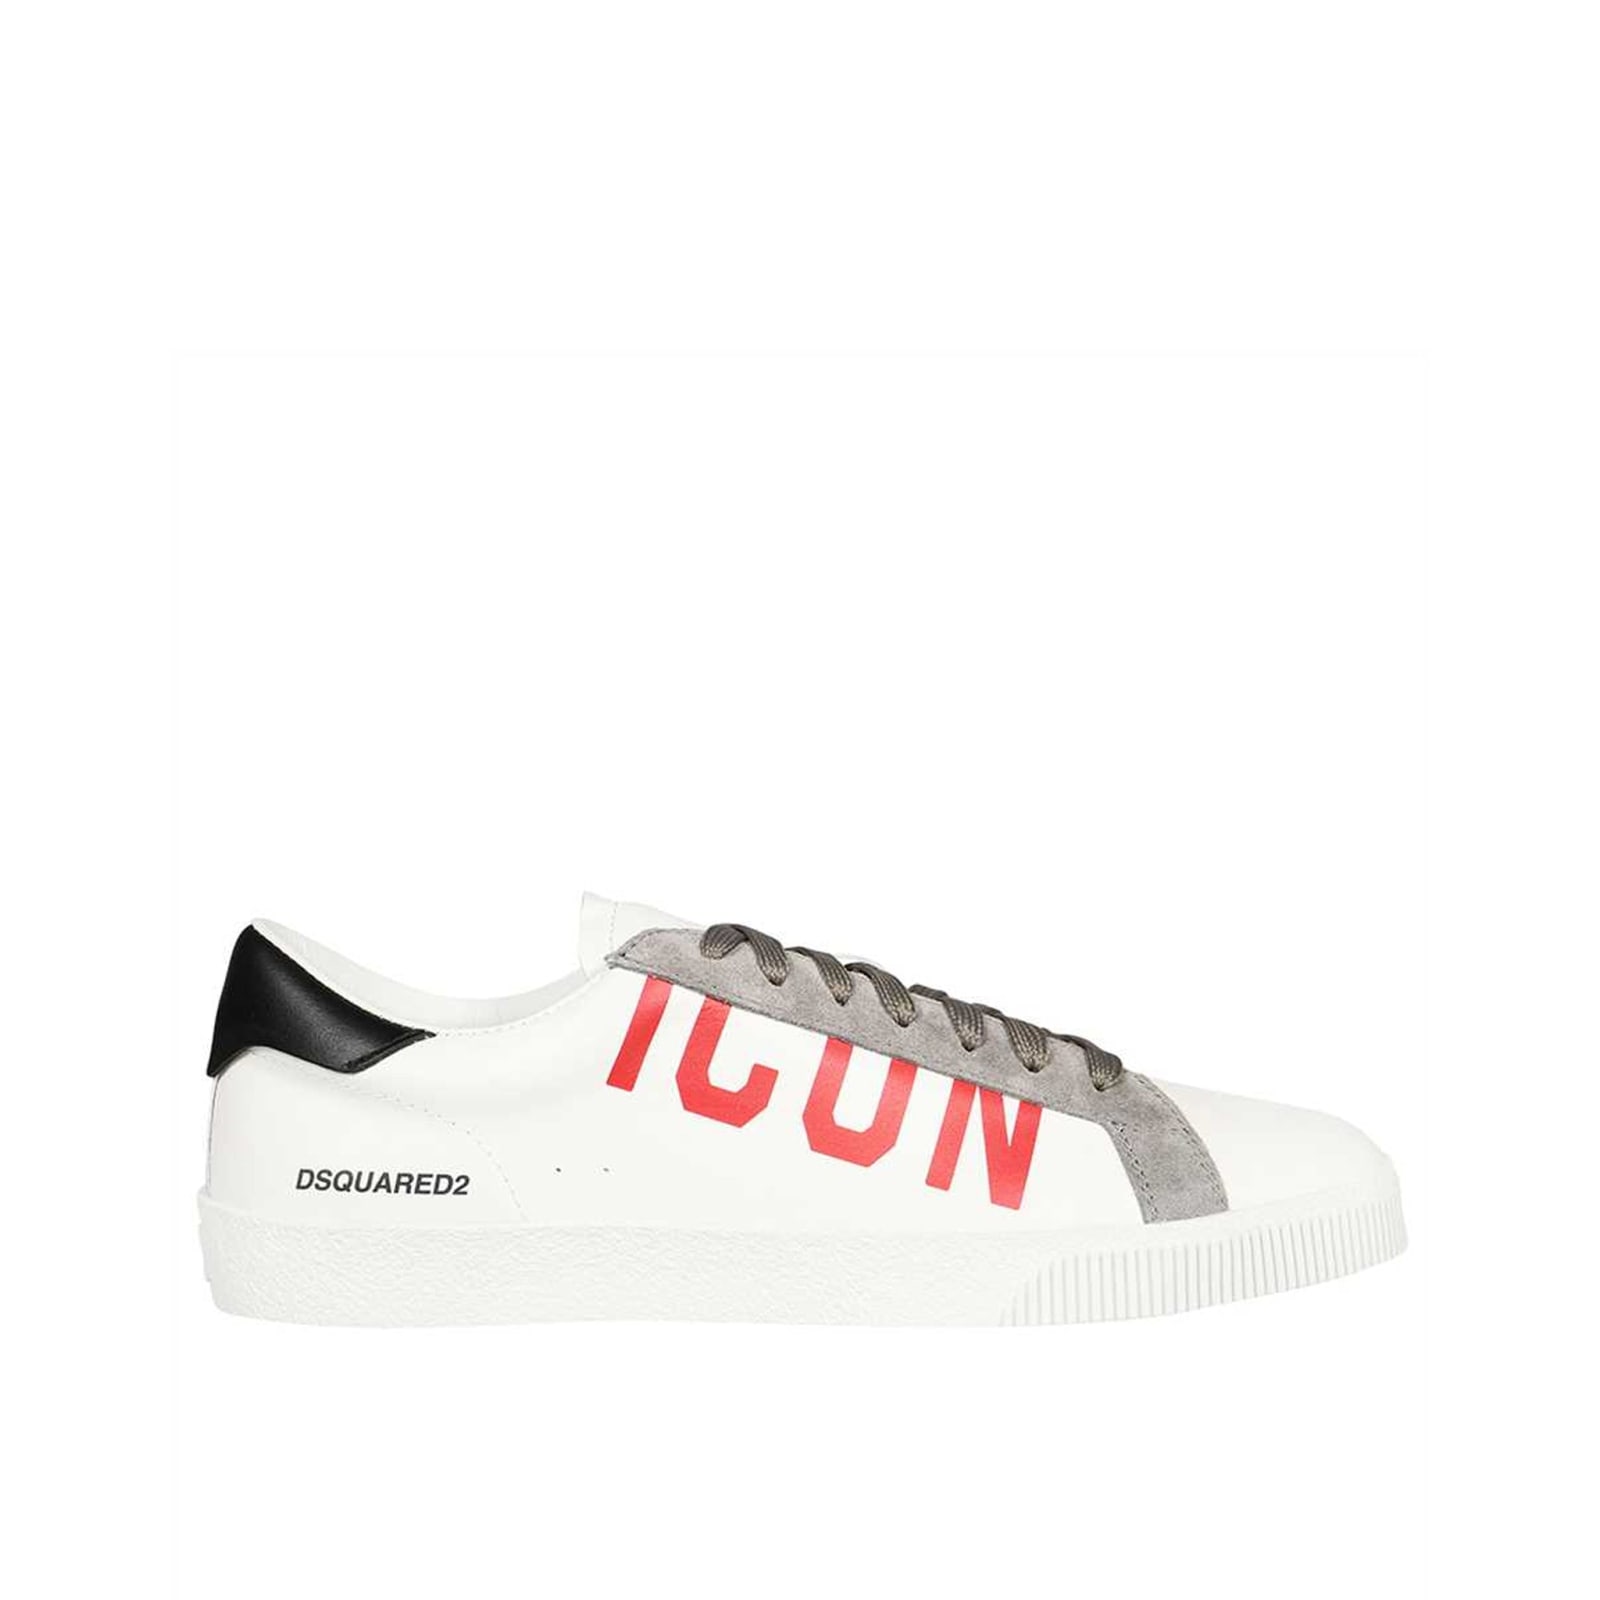 DSQUARED2 CASSETTA LEATHER SNEAKERS